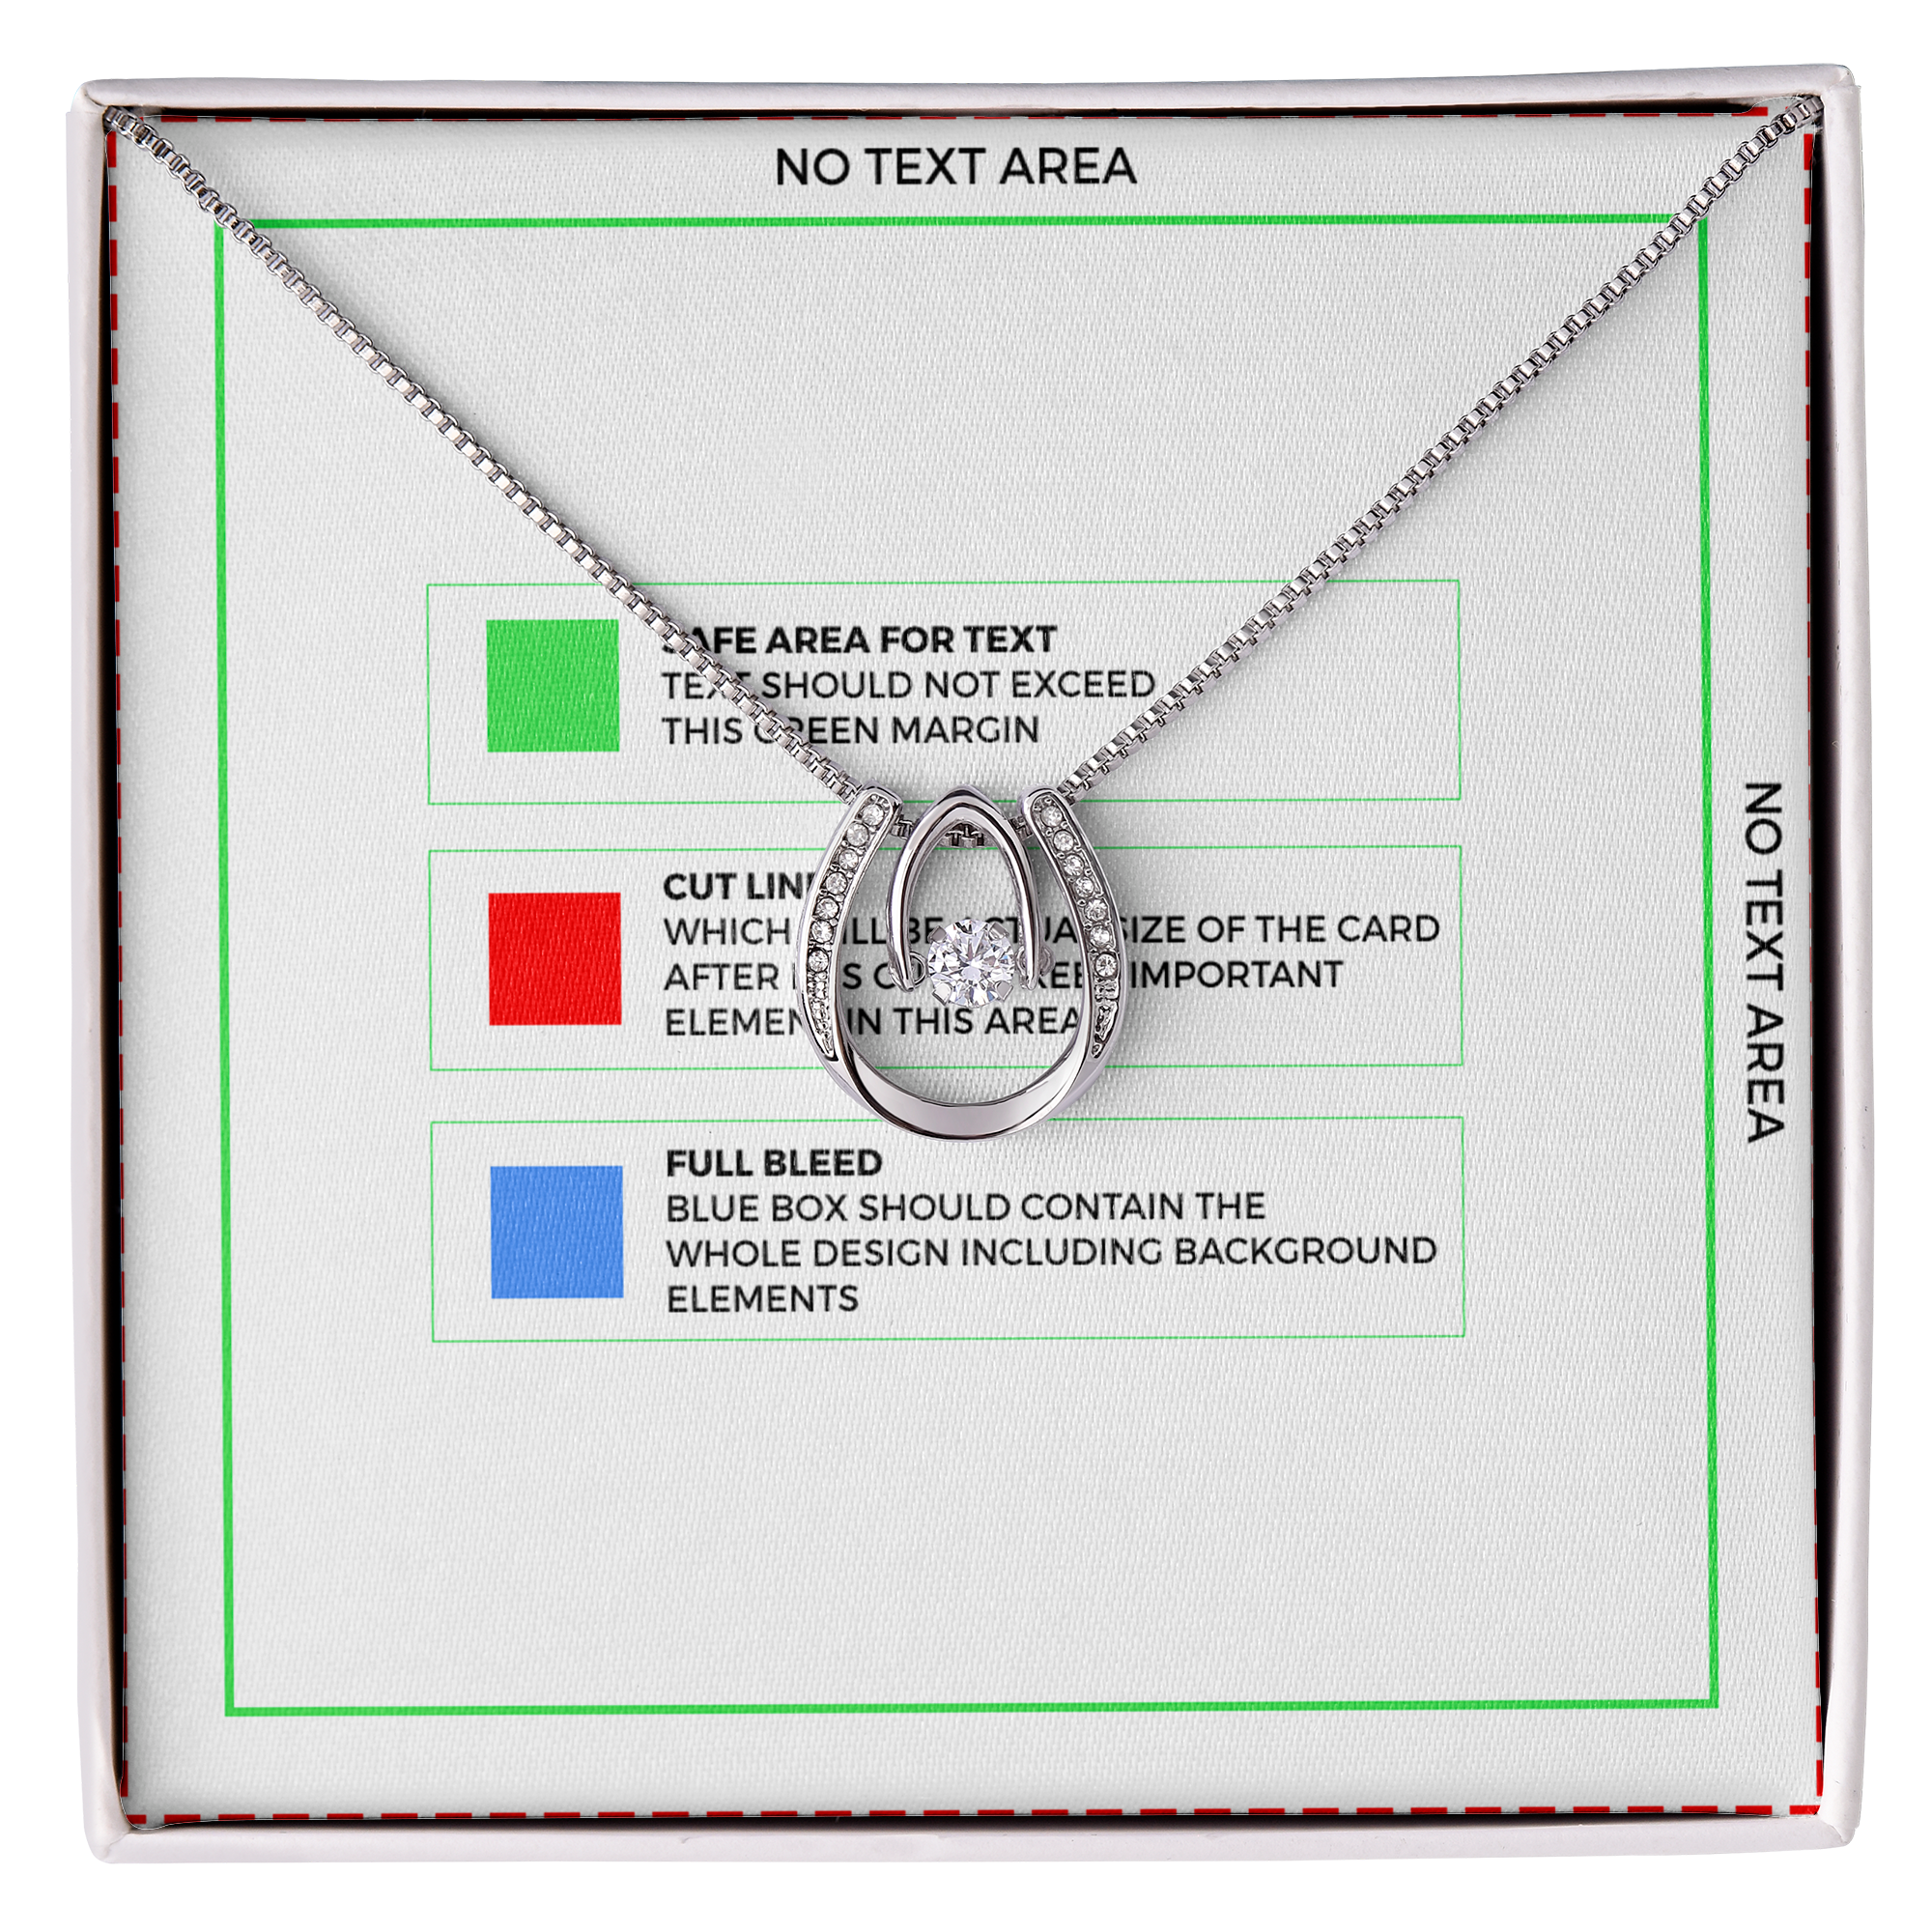 To My Daughter Always be Dad's Little Girl Lucky Horseshoe Necklace Message Card 14k w CZ Crystals-Express Your Love Gifts